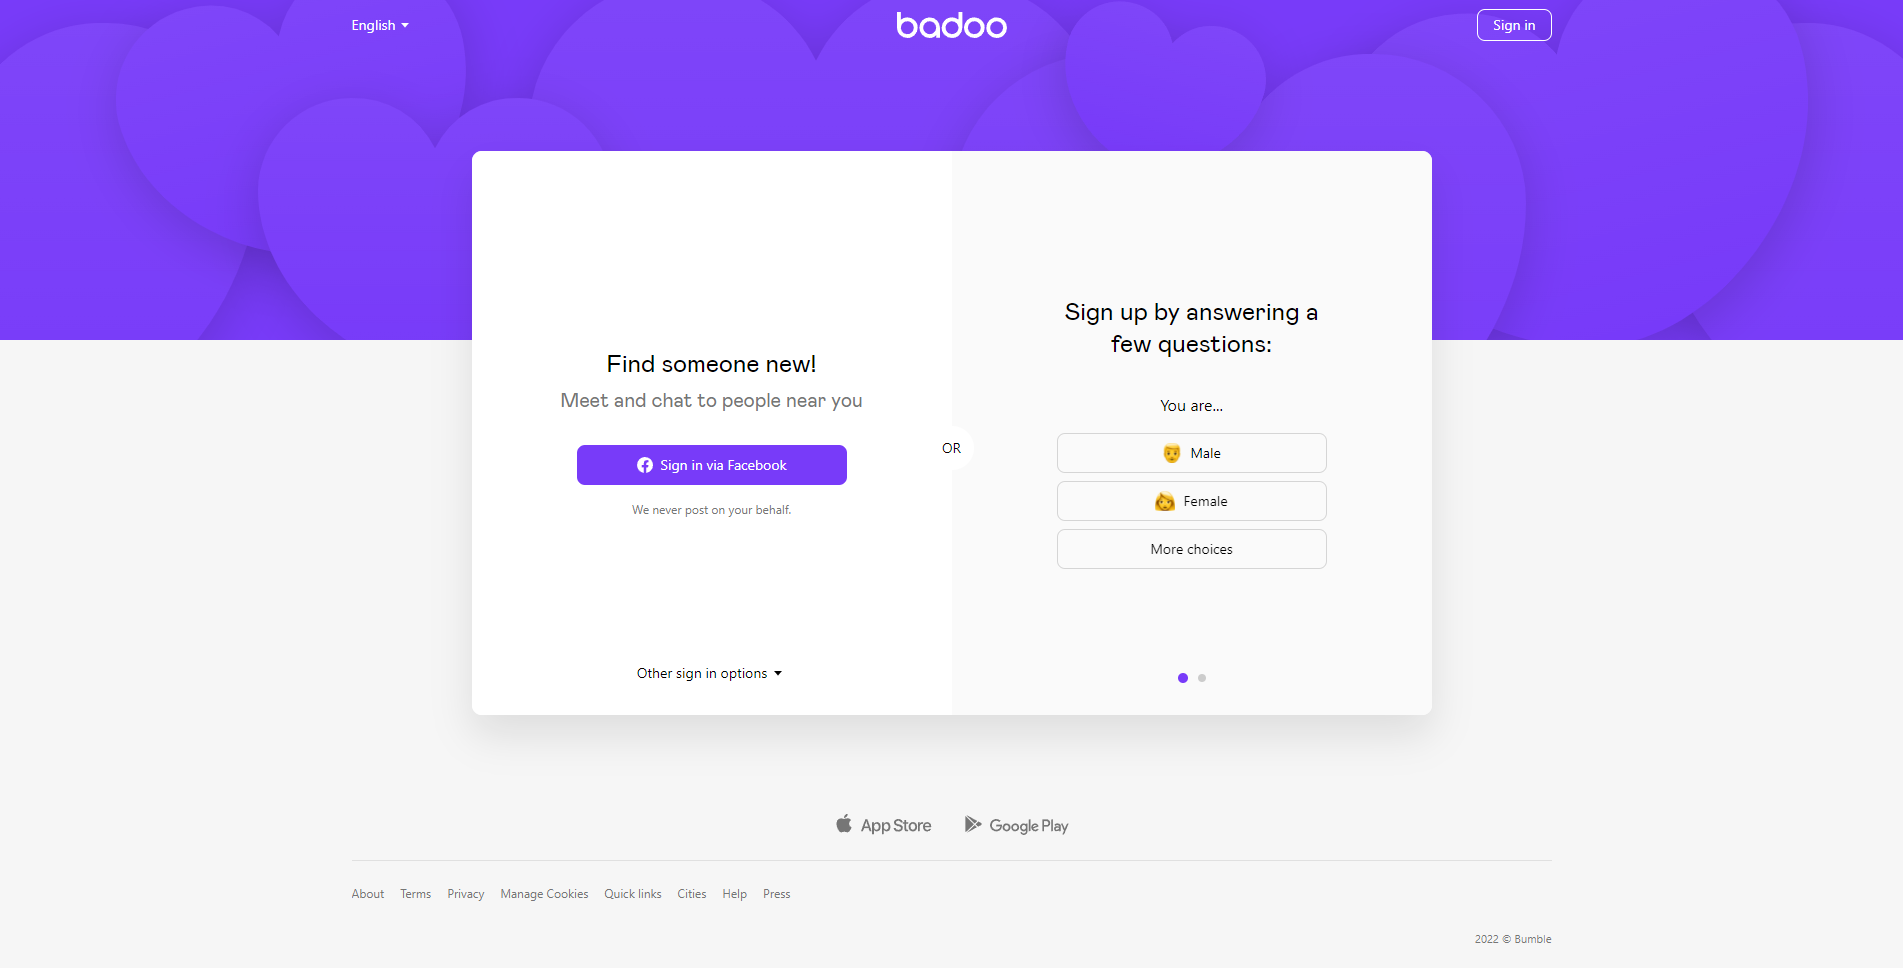 How to find out if someone has a badoo account